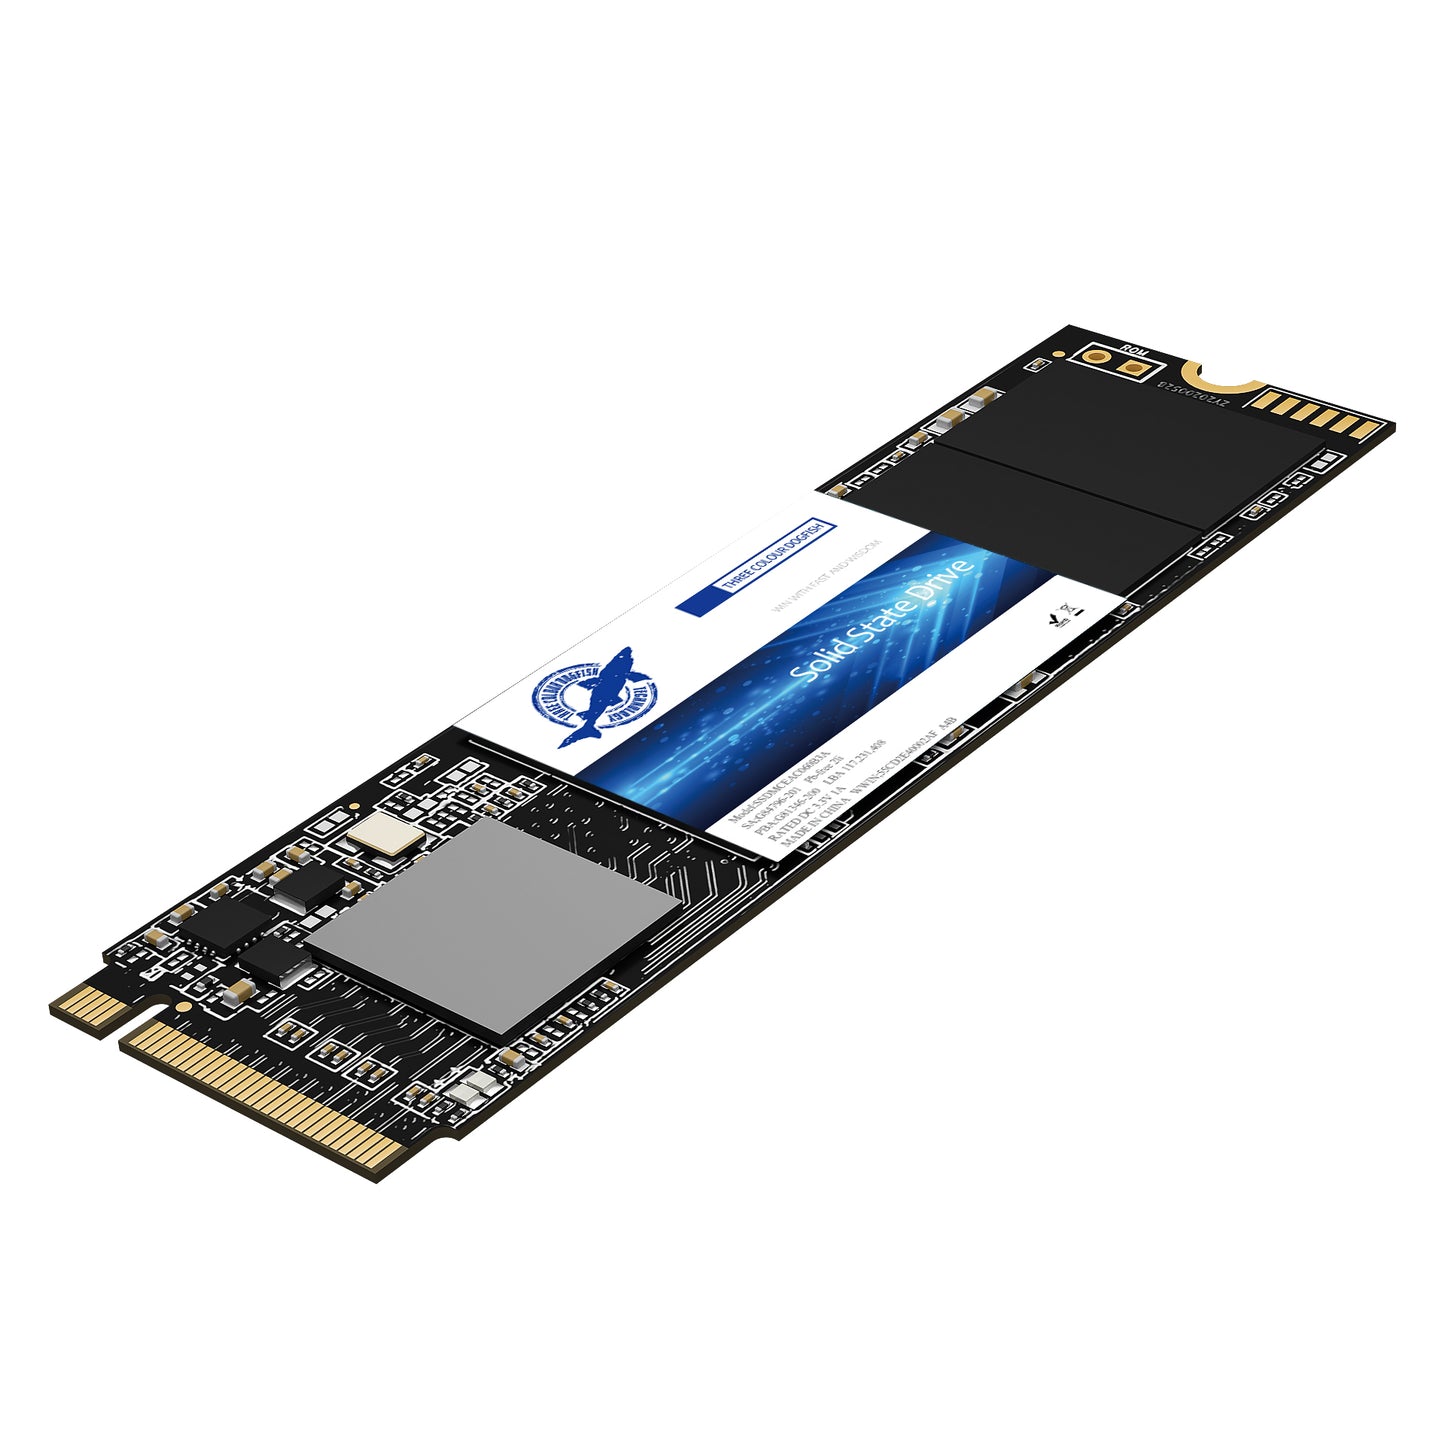 THREE COLOUR DOGFISH PCIe NVMe 4.0 SSD  Internal Solid State Drive Gen4x4